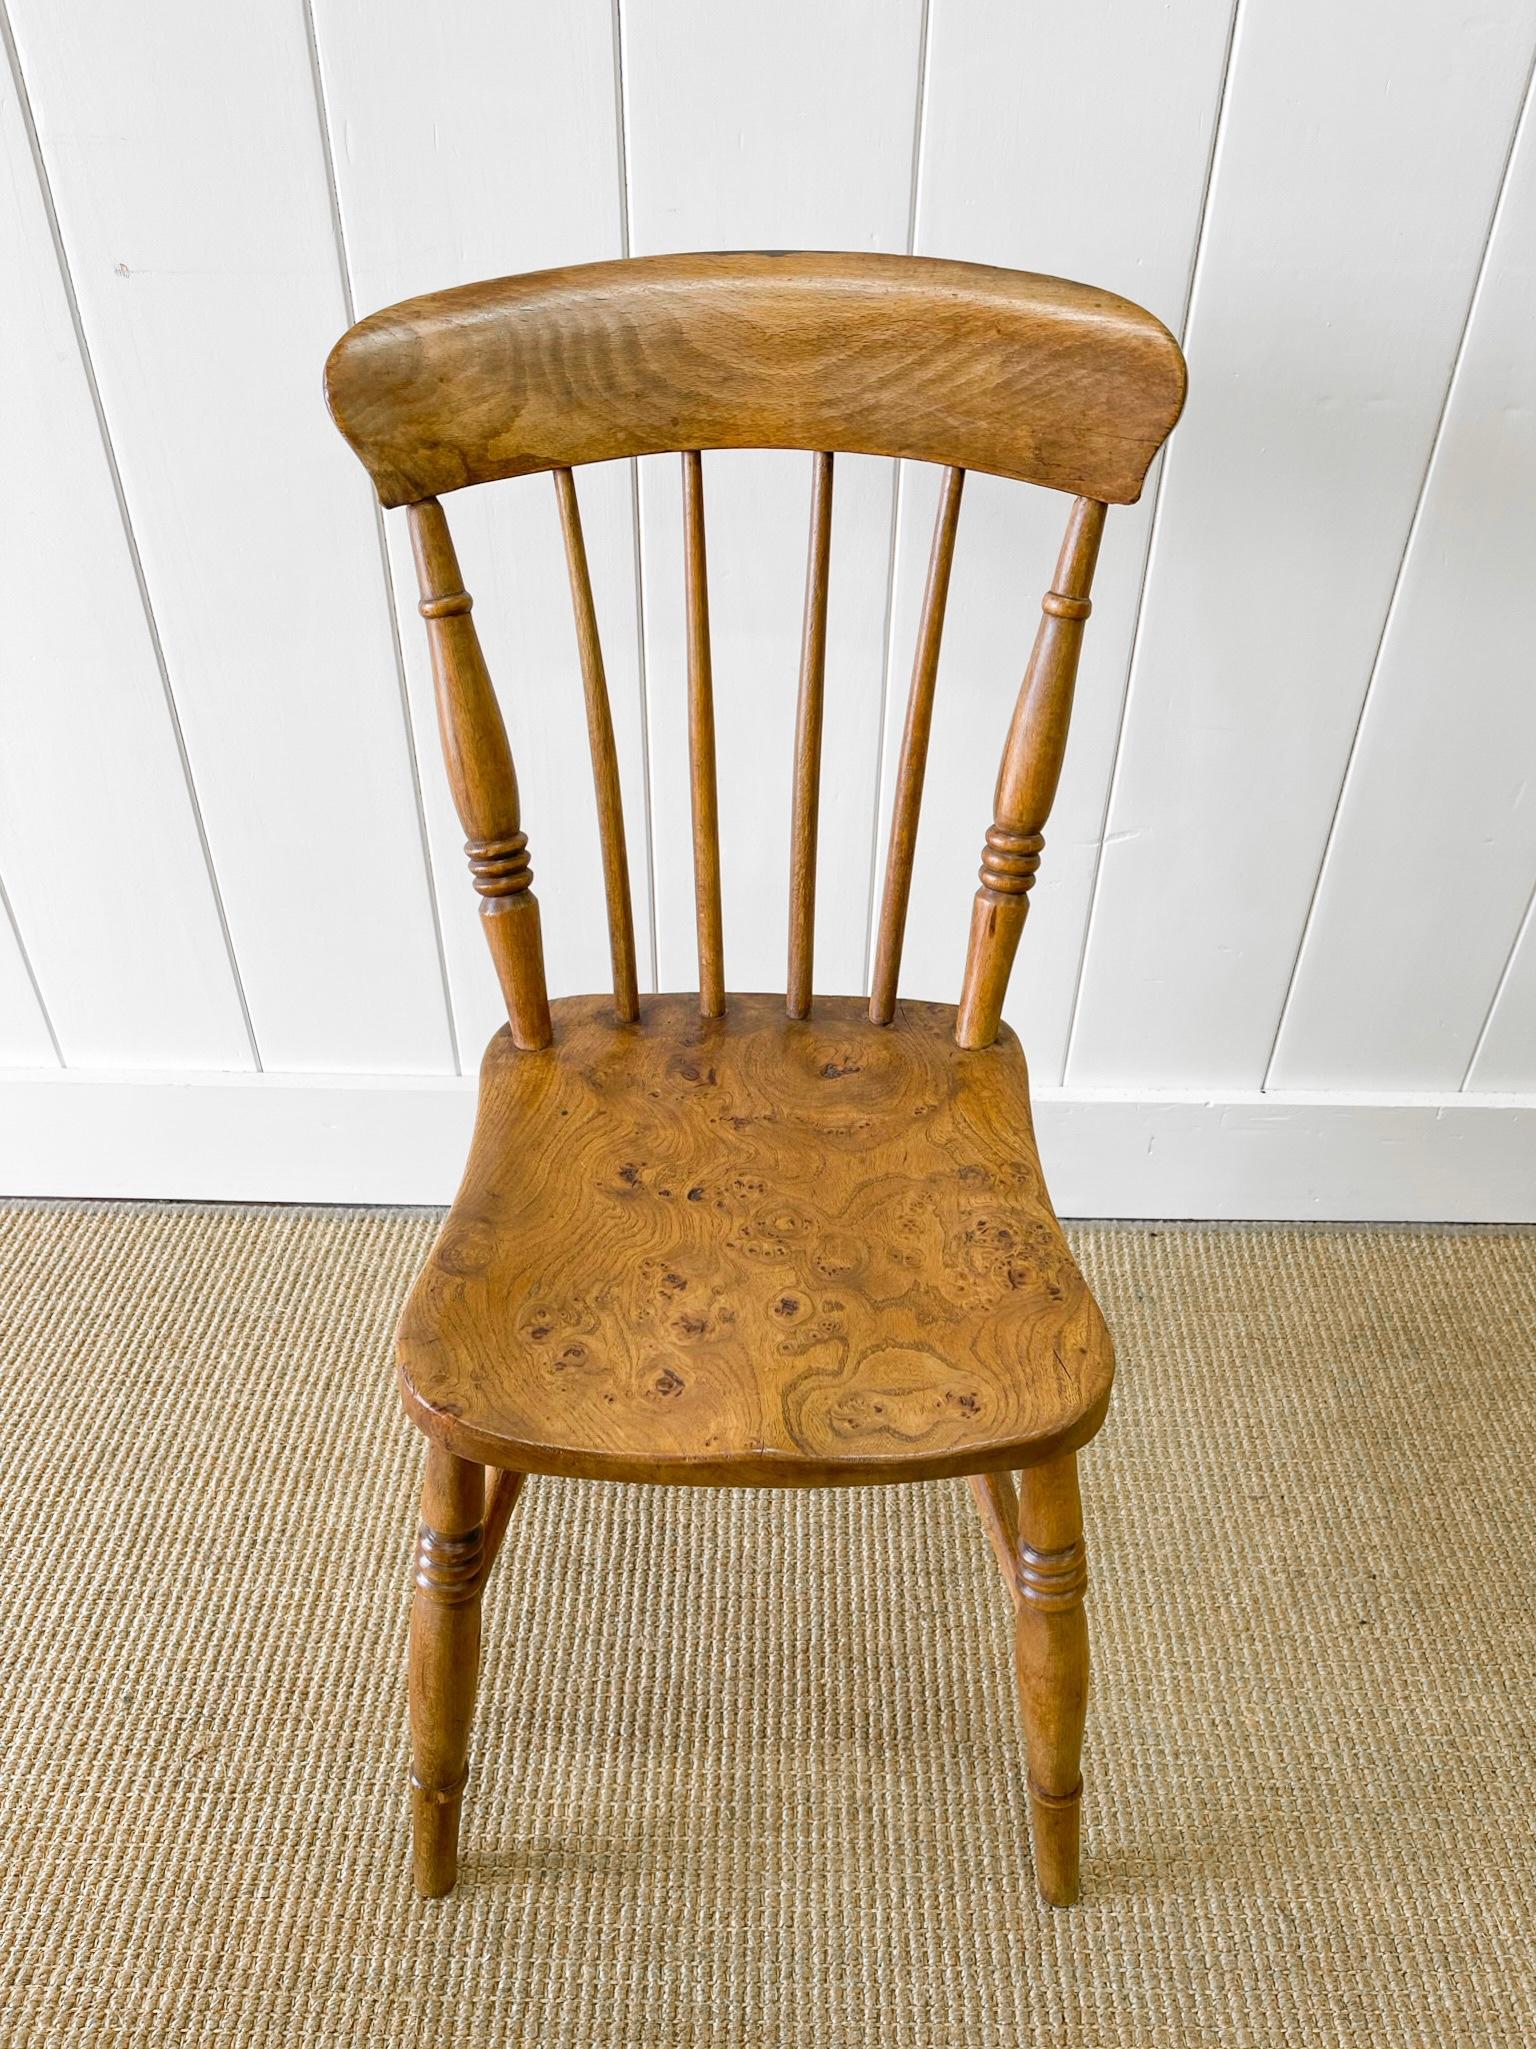 An Antique Set of 4 Early 19th Century Stick Back Chairs For Sale 1